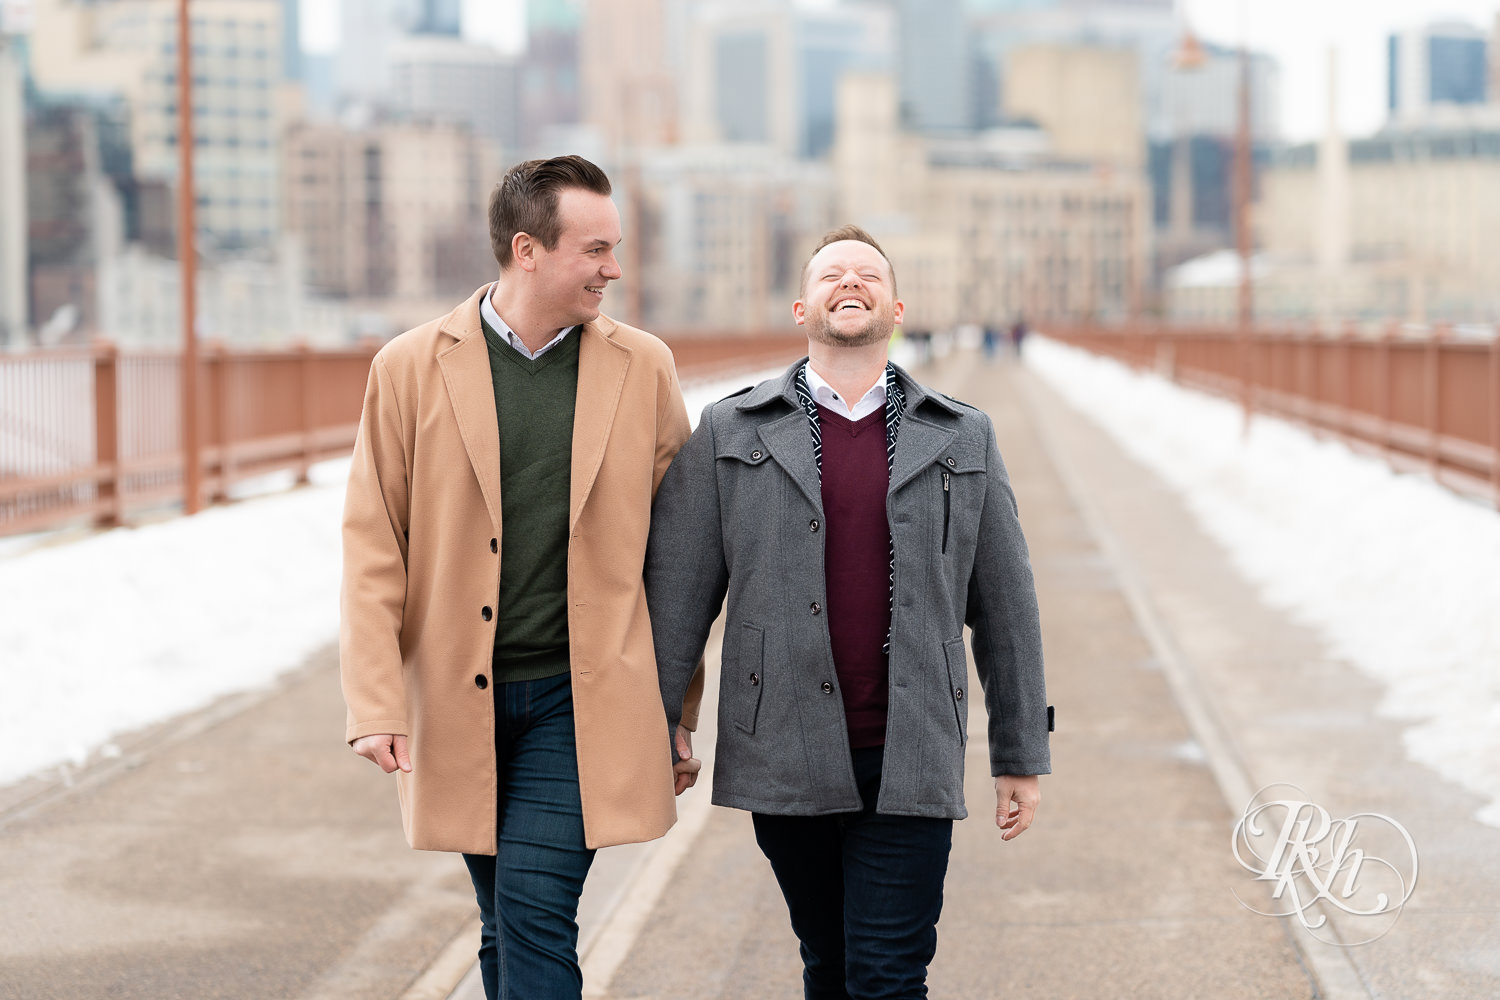 Gay men laugh on the Stone Arch Bridge during the winter in Minneapolis, Minnesota.